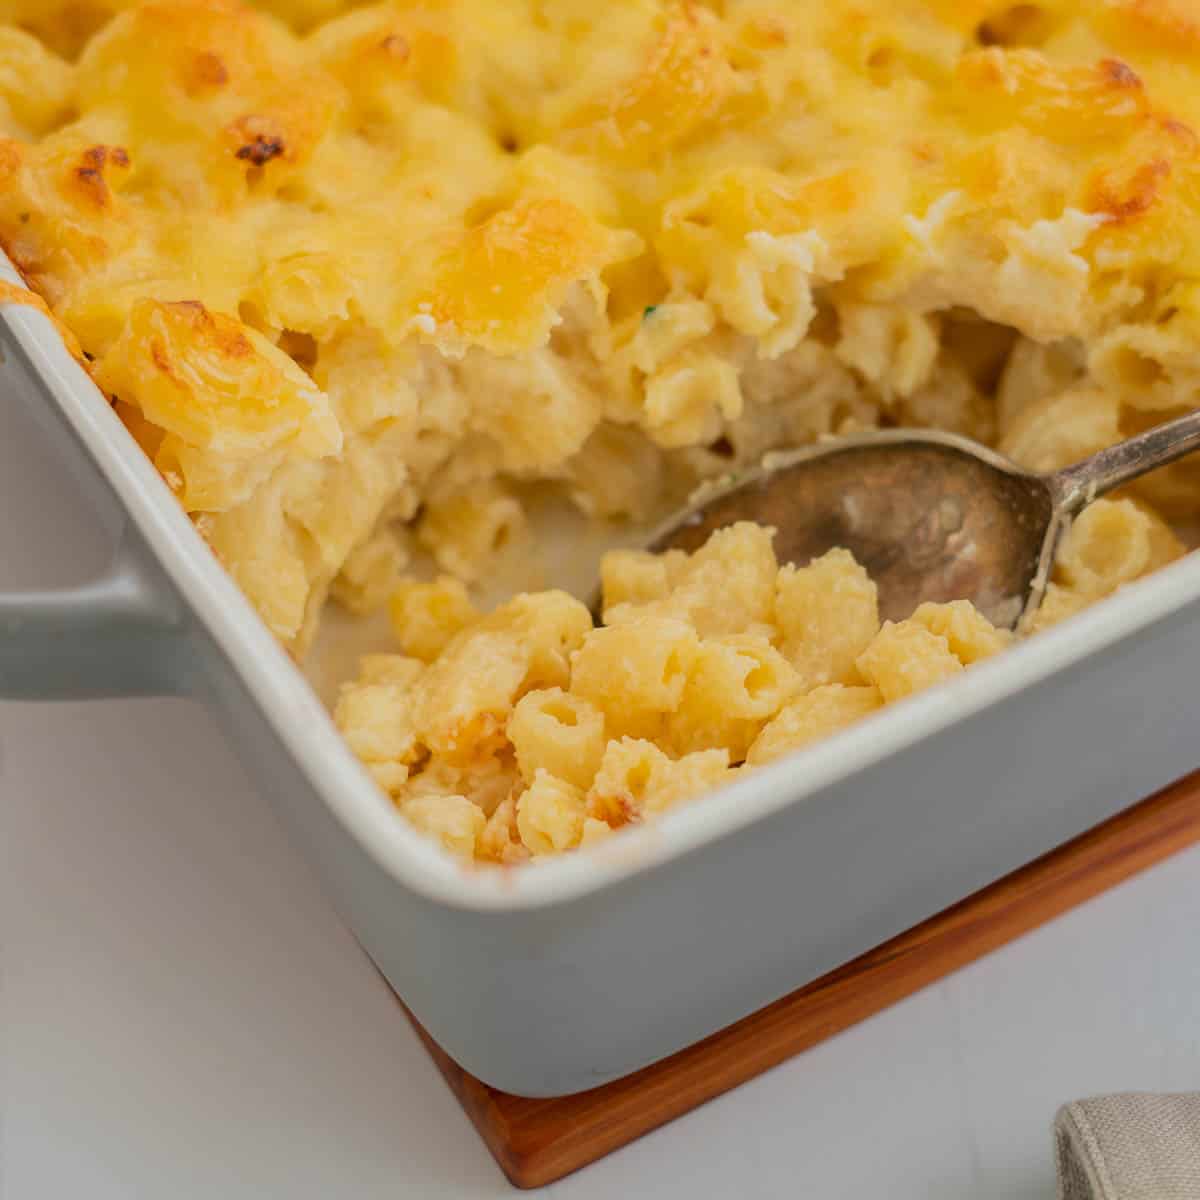 Baked mac and cheese being served with a large serving spoon